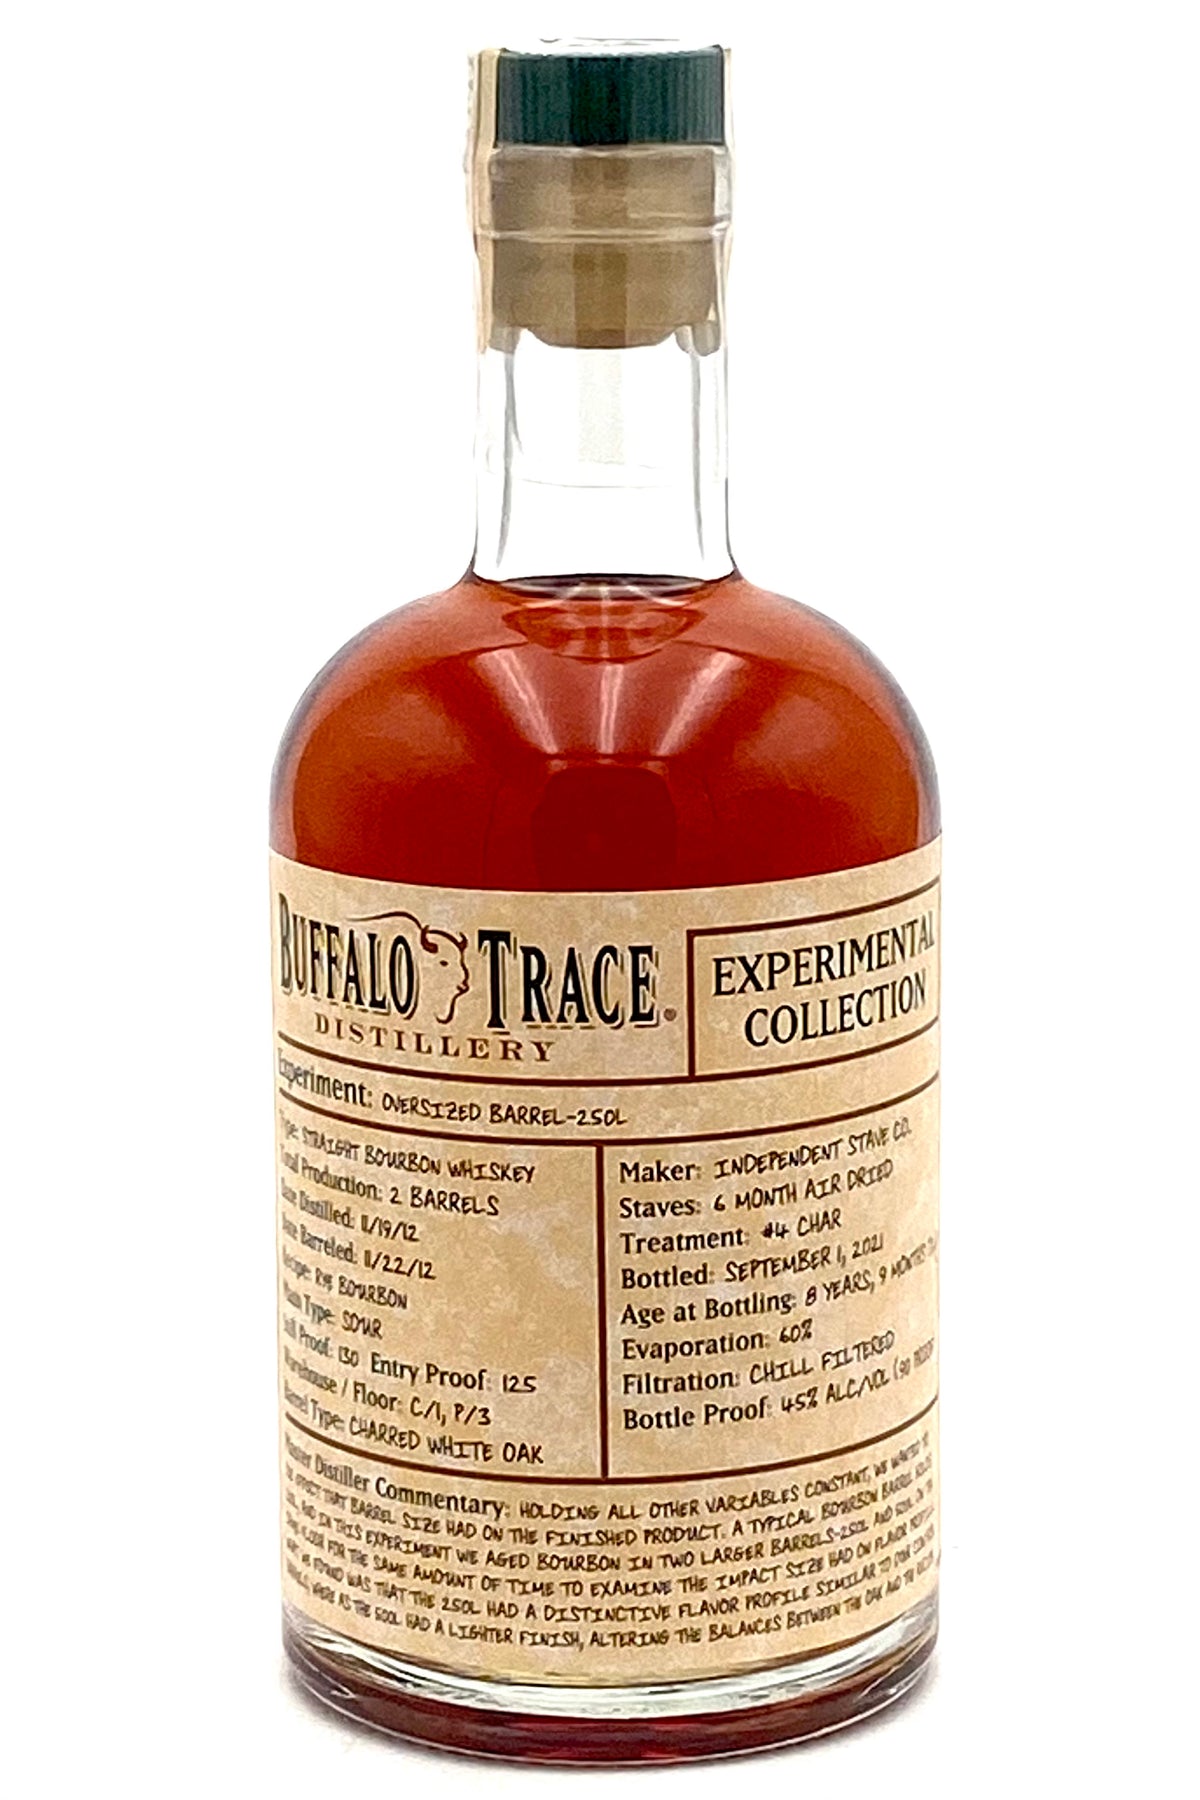 Buffalo Trace Experimental Collection &quot;Oversized Barrel 250L&quot; Bourbon Whiskey 375ml